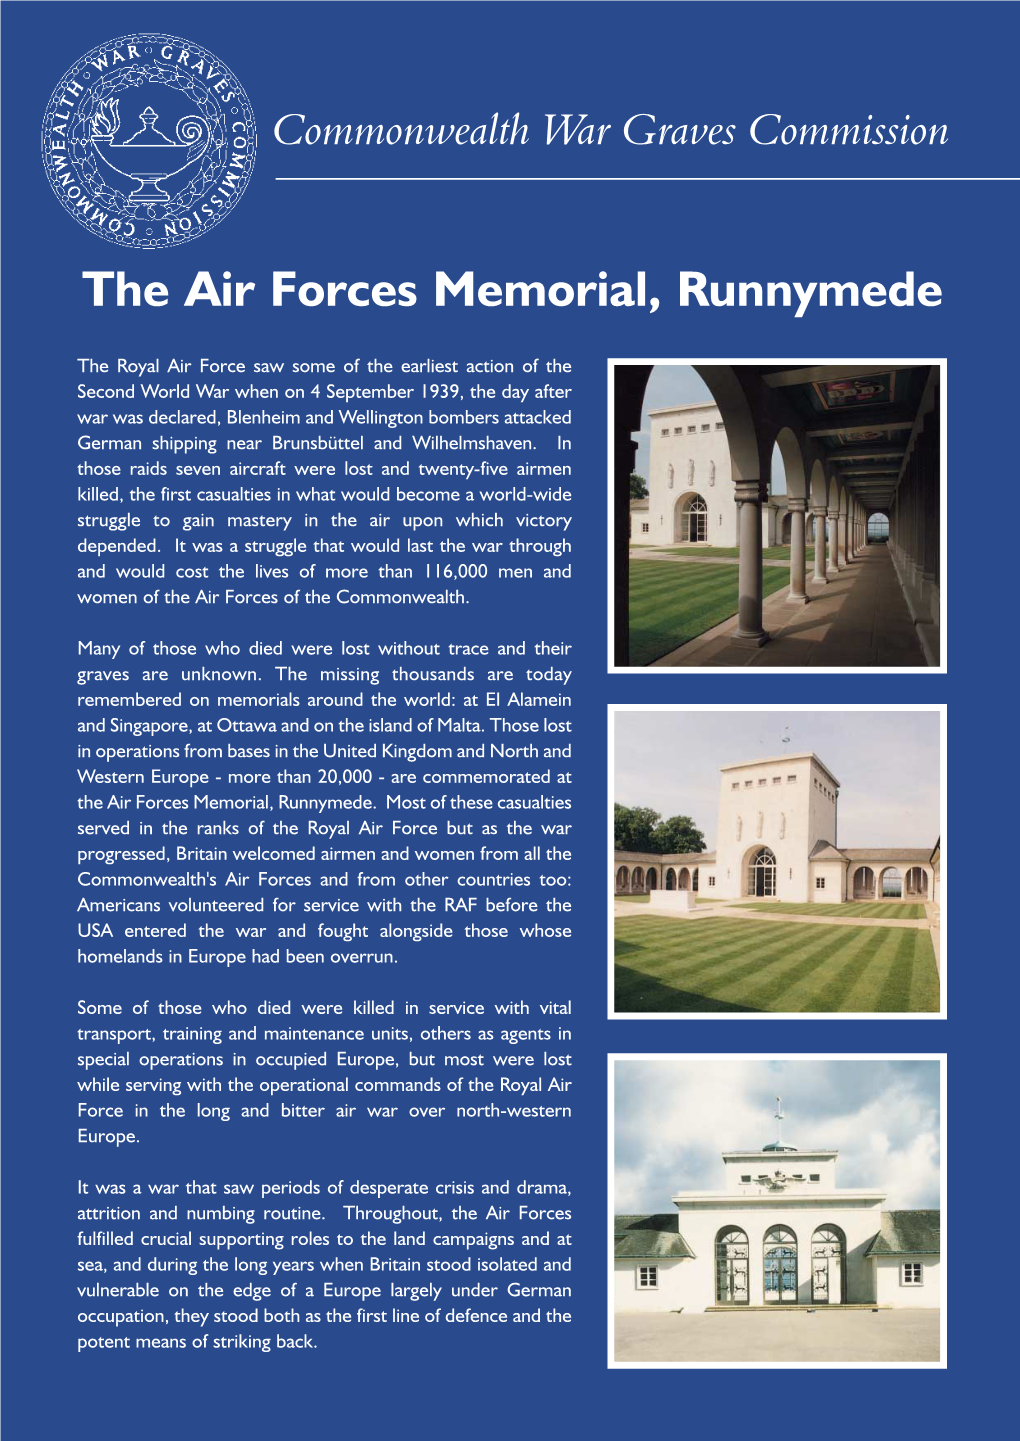 The Air Forces Memorial, Runnymede